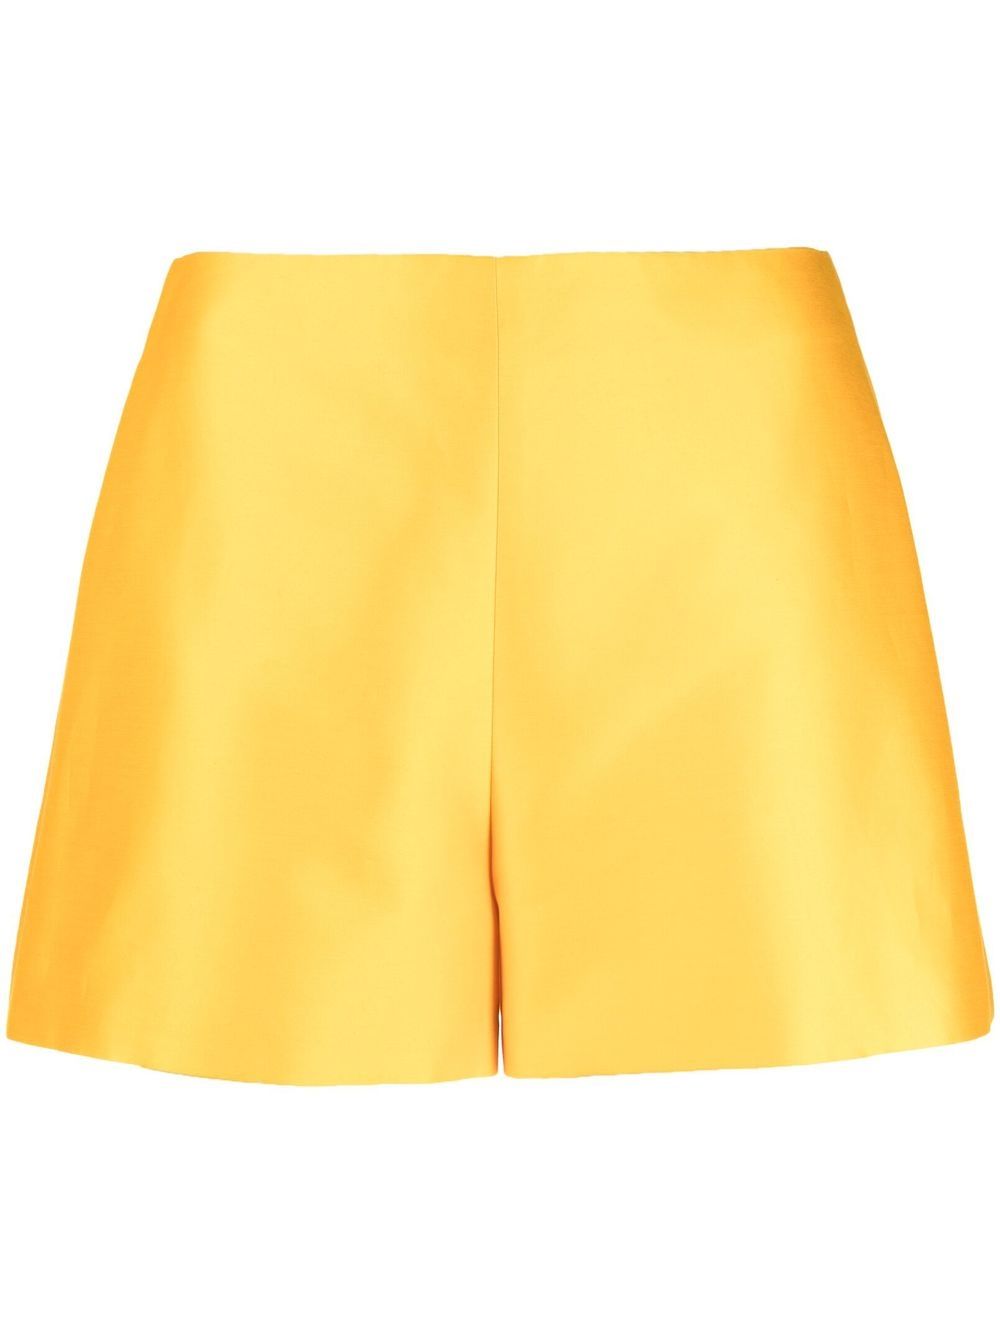 Emilio Pucci high-waisted tailored shorts - Yellow